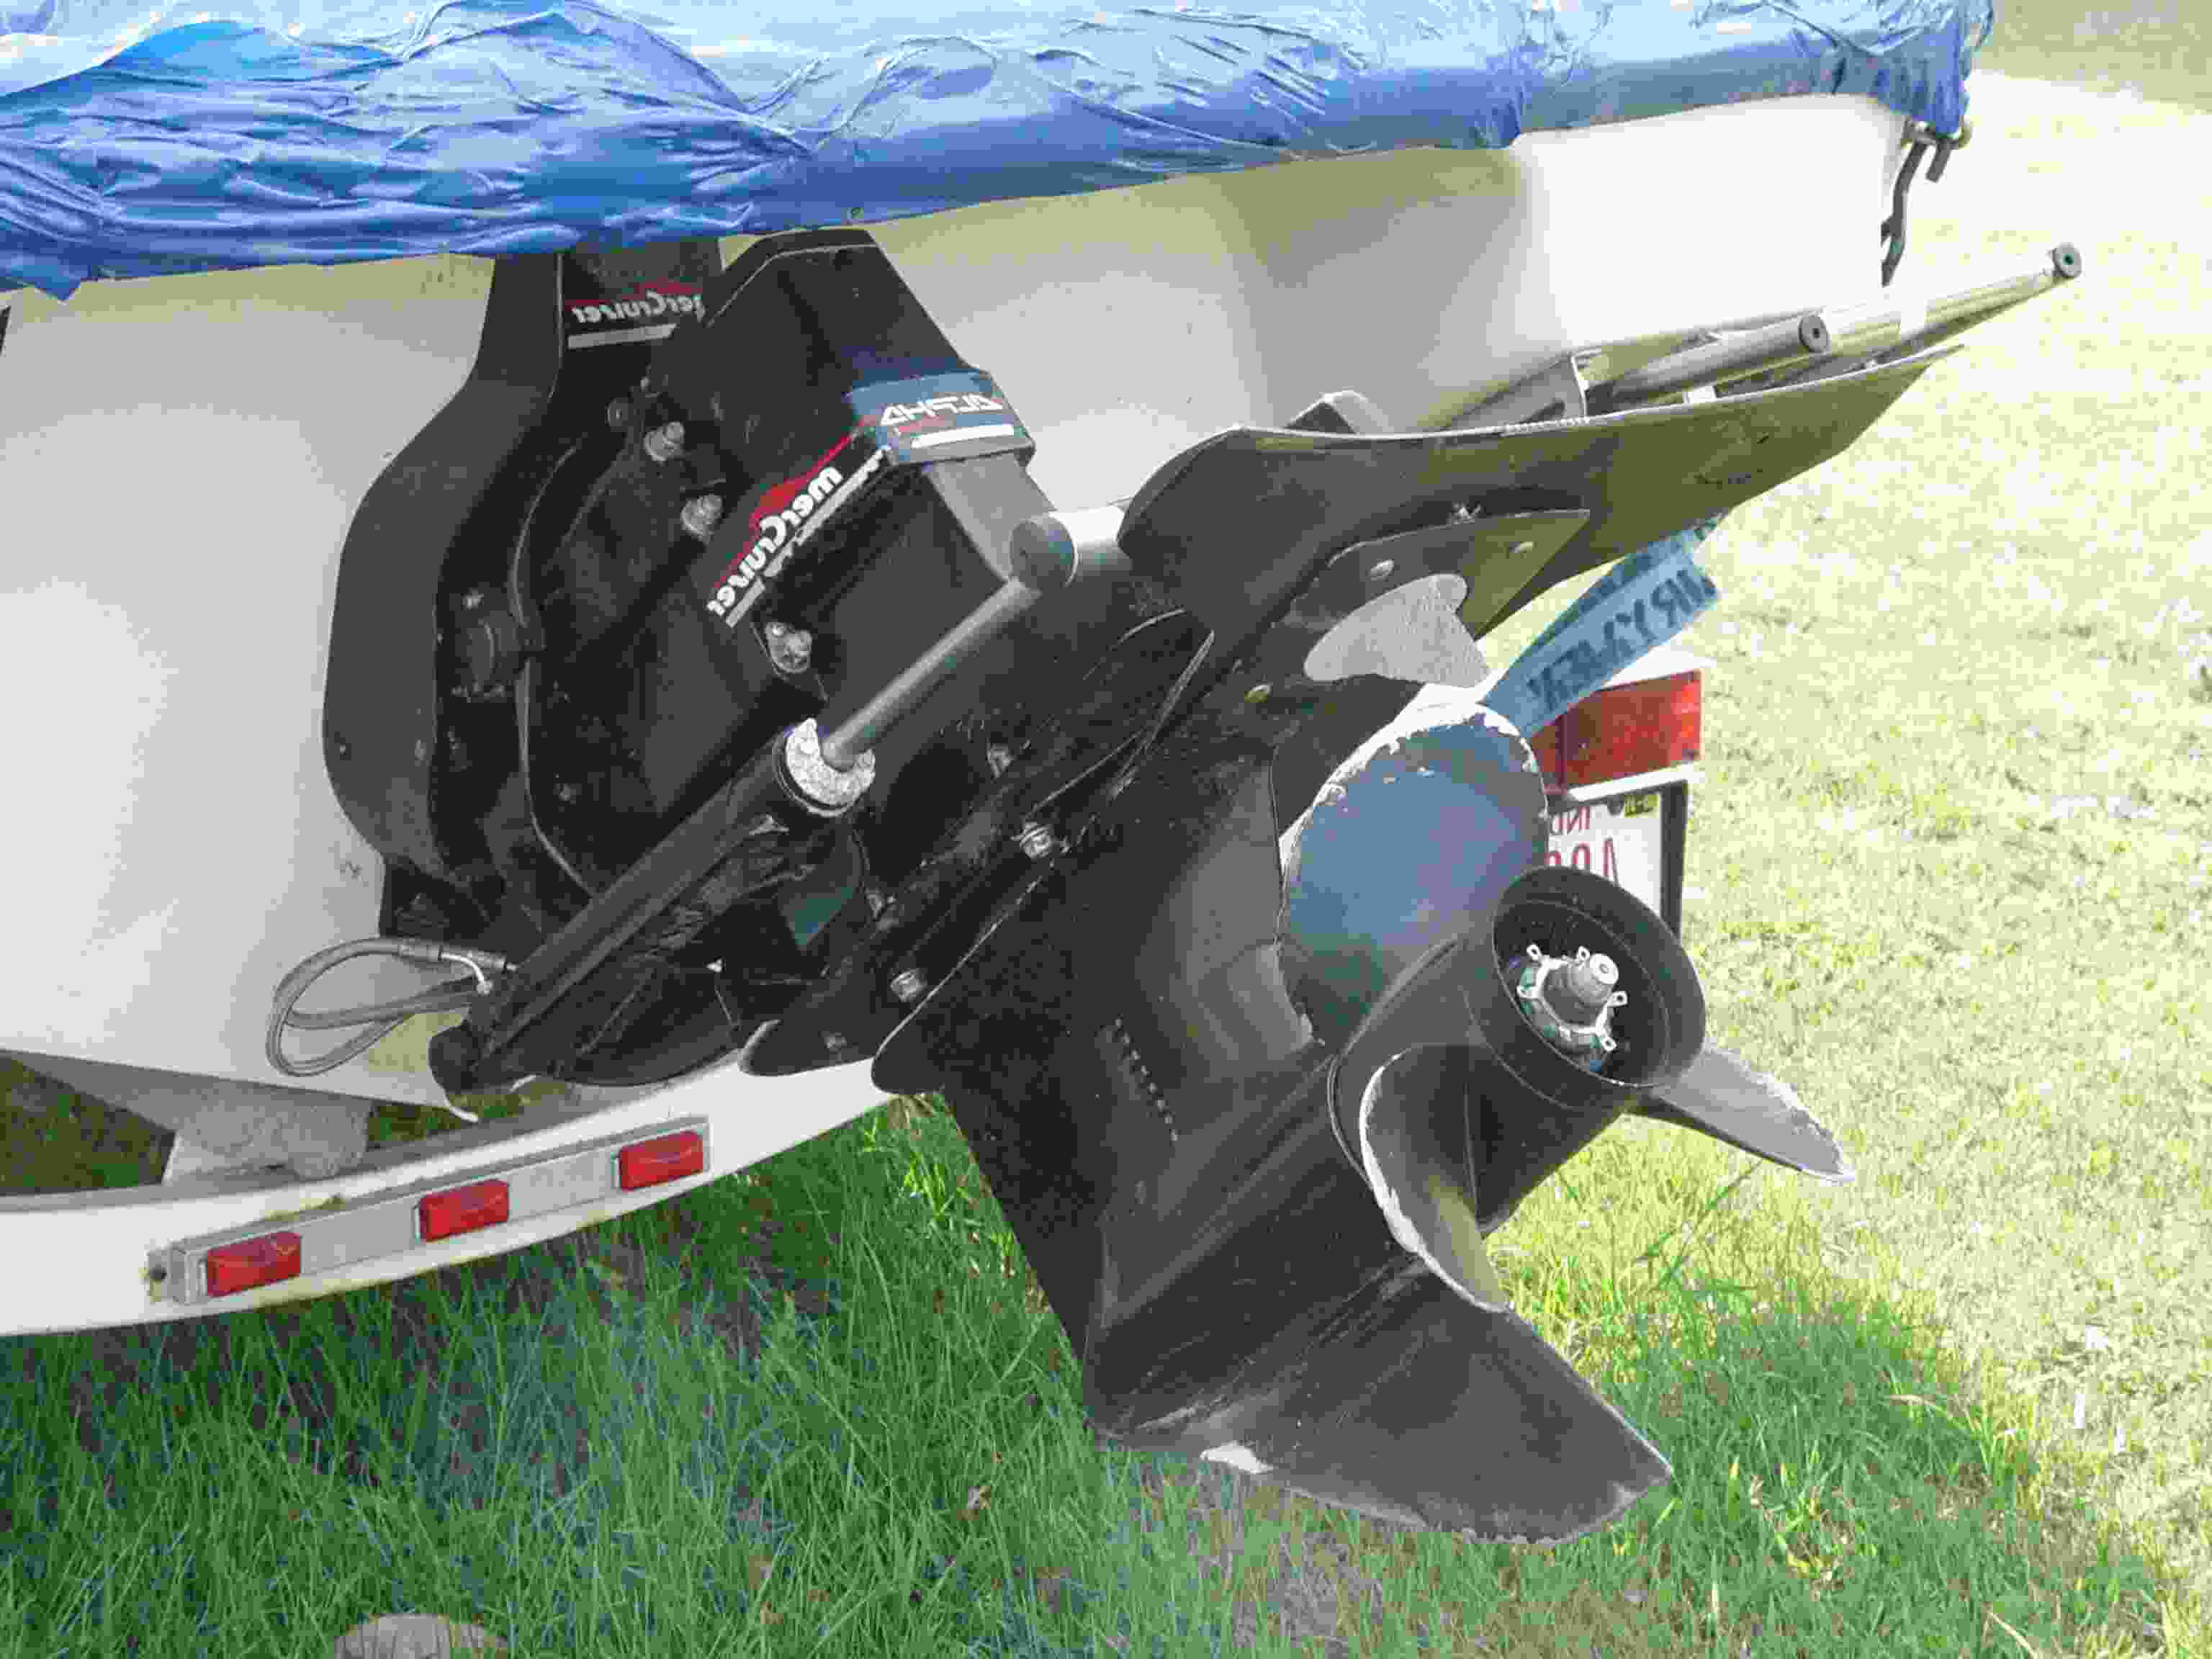 recommended maintenance for an inboard boat